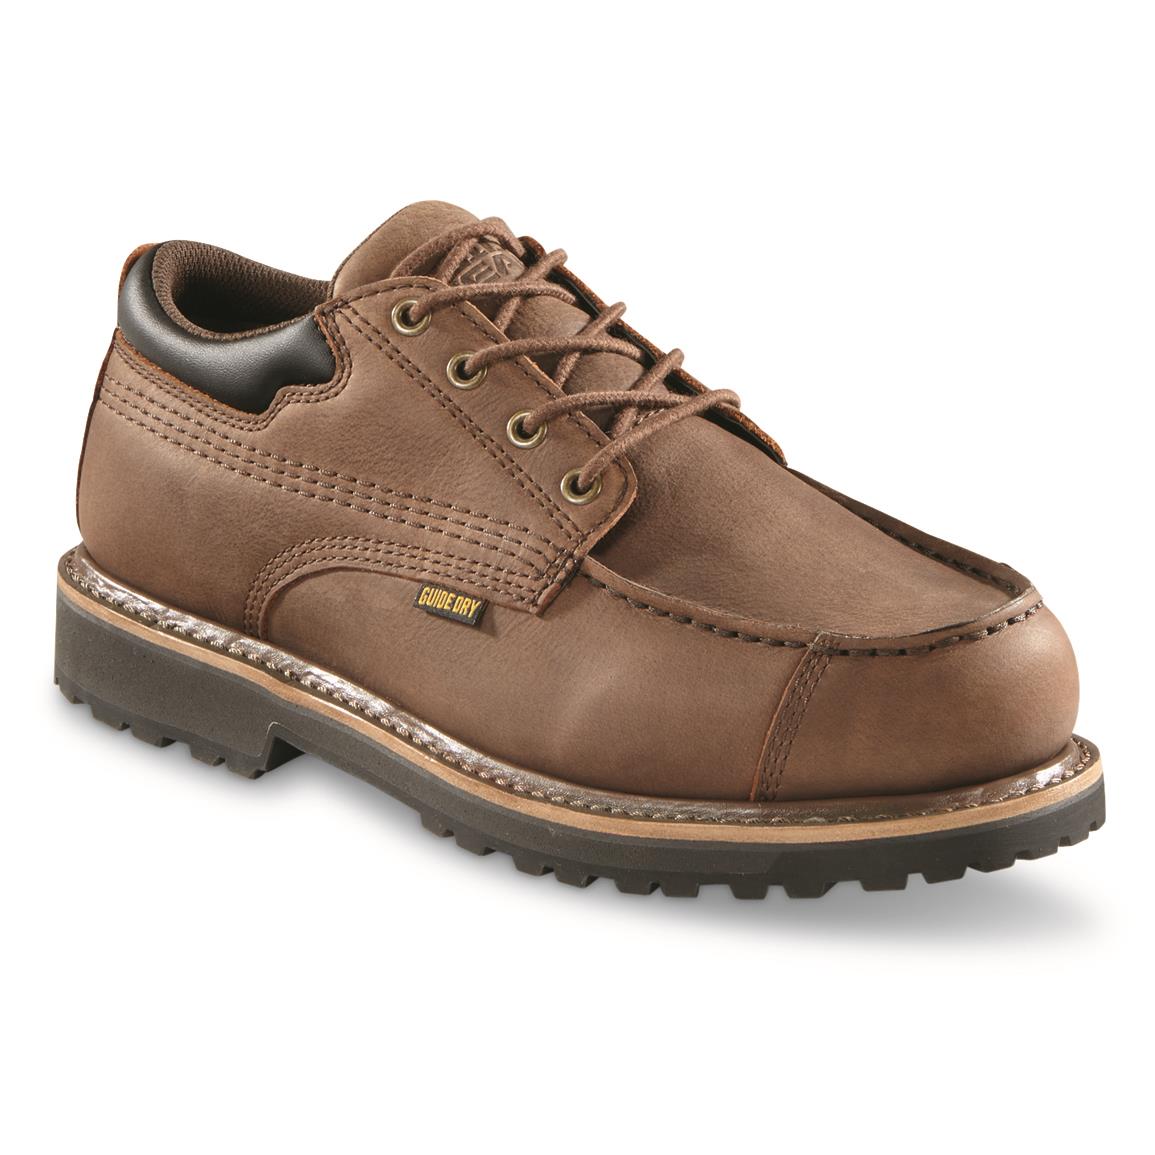 Guide Gear Rugged Timber Waterproof Oxford Shoes, Canteen Brown